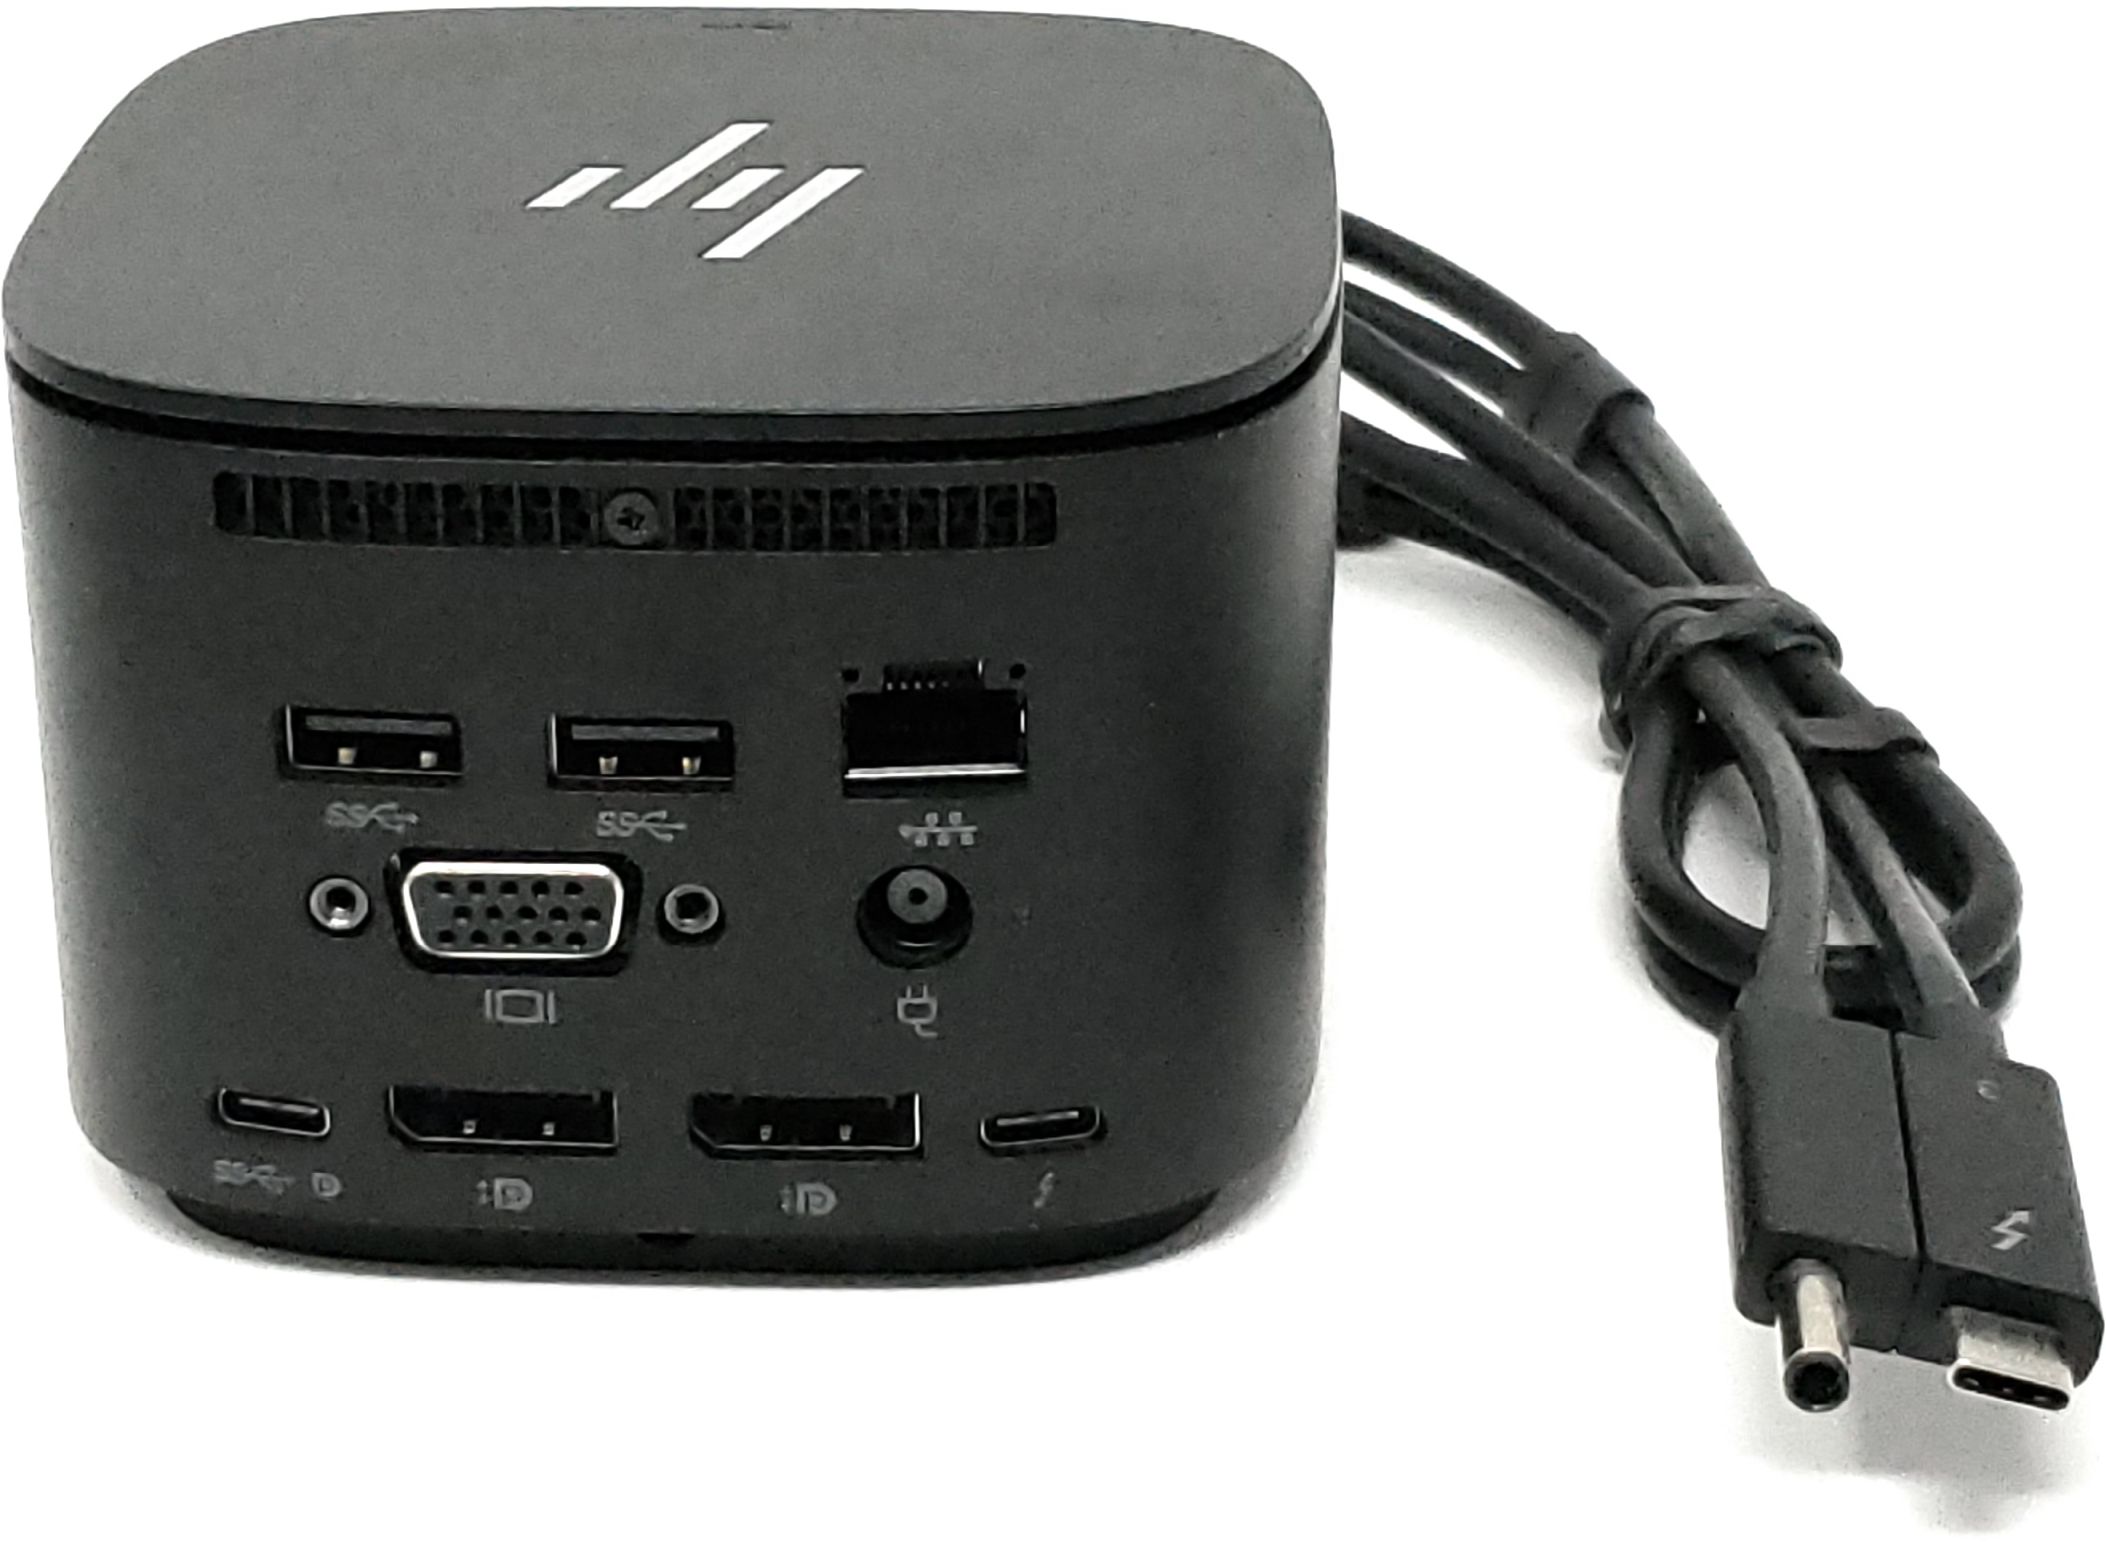 Genuine HP 230W AC DC Adapter for Universal Thunderbolt Dock G2